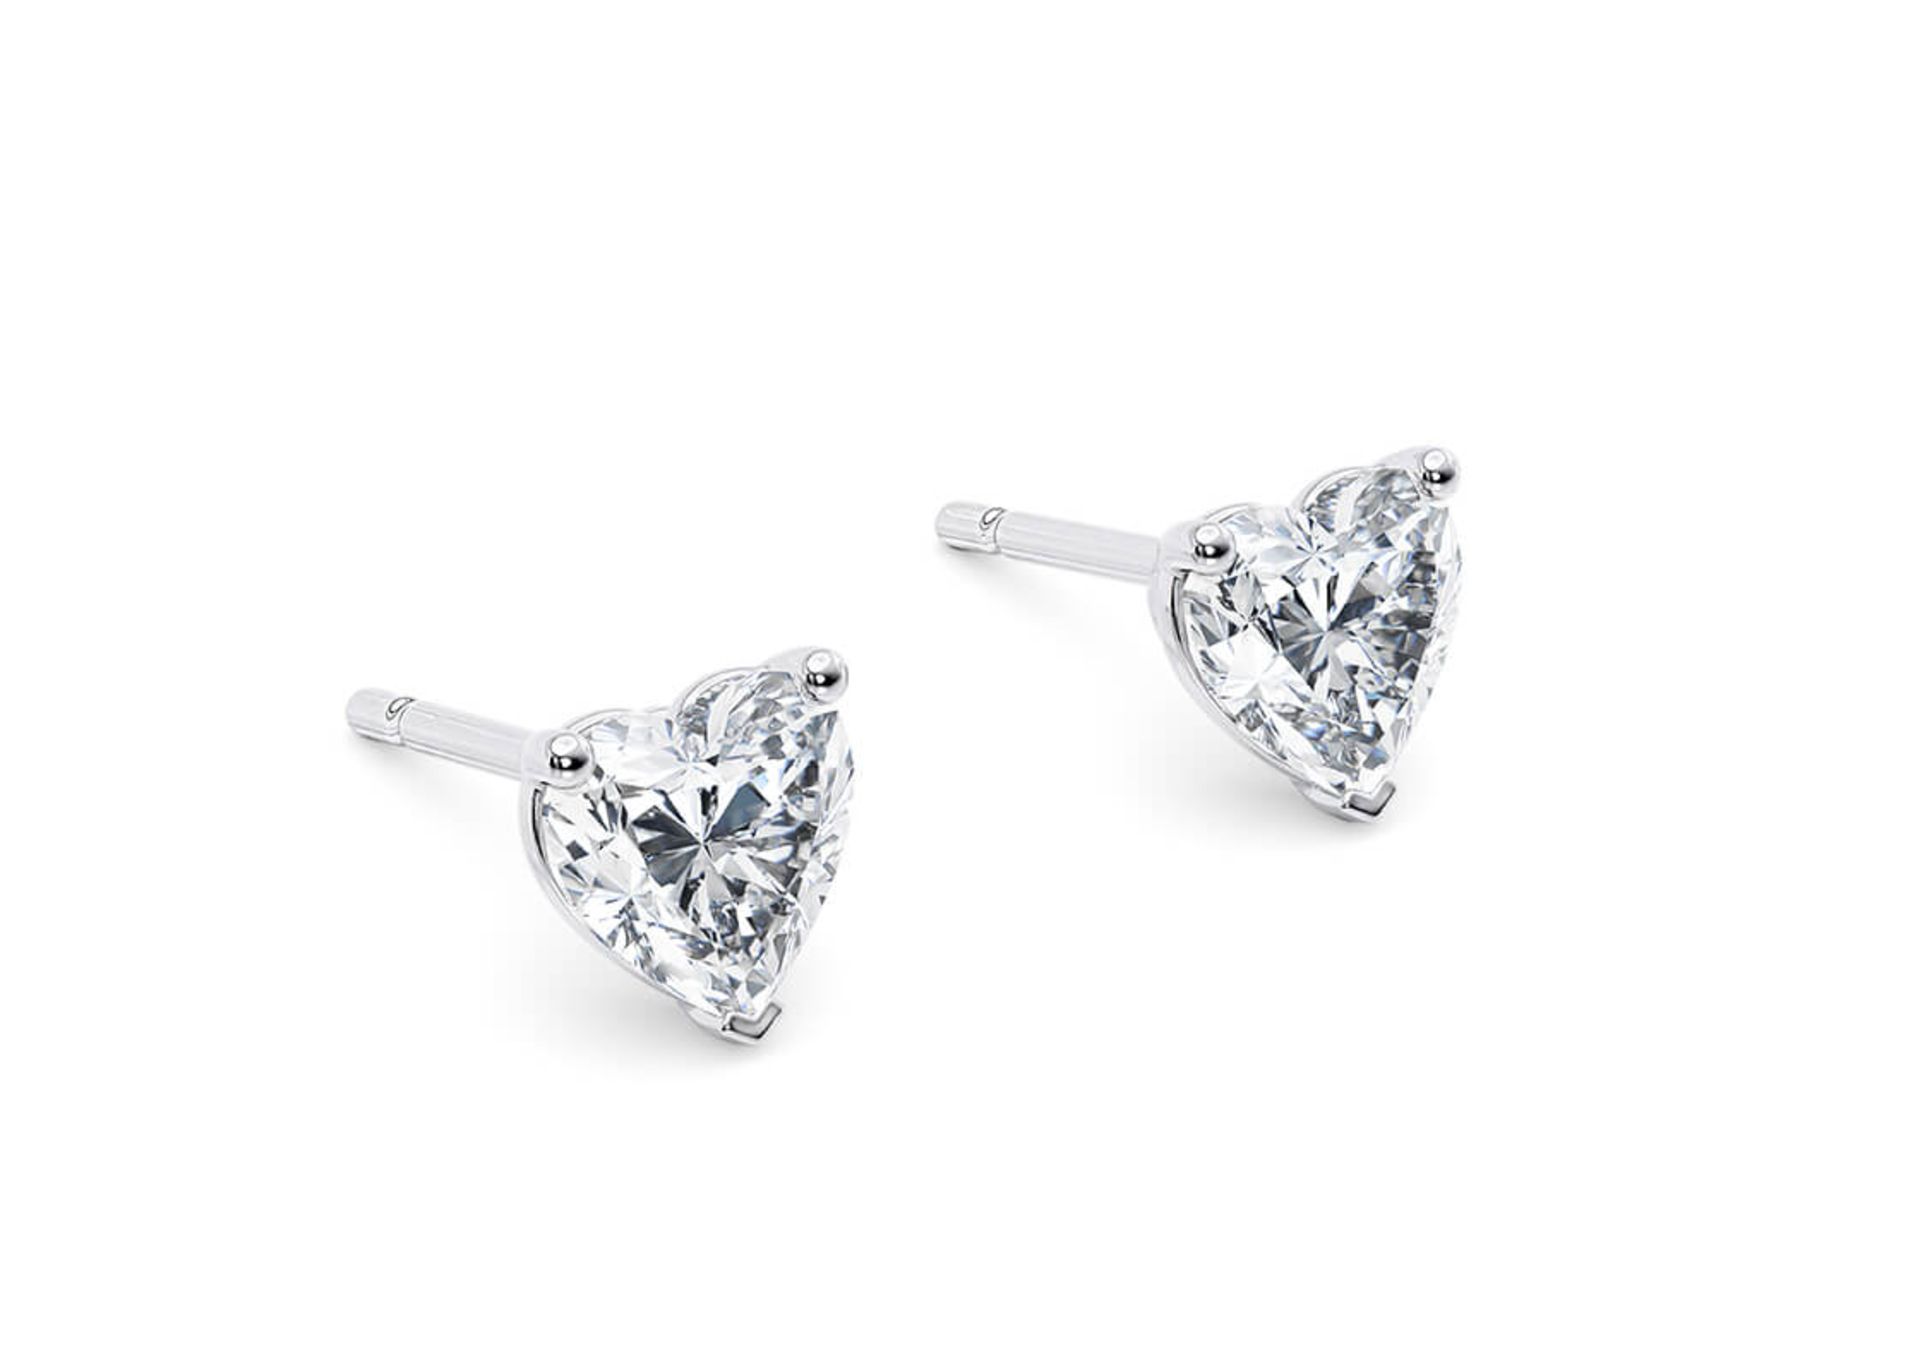 Heart Cut 3.00 Carat Natural Diamond Earrings 18kt White Gold - Colour D - SI Clarity- GIA - Image 2 of 3